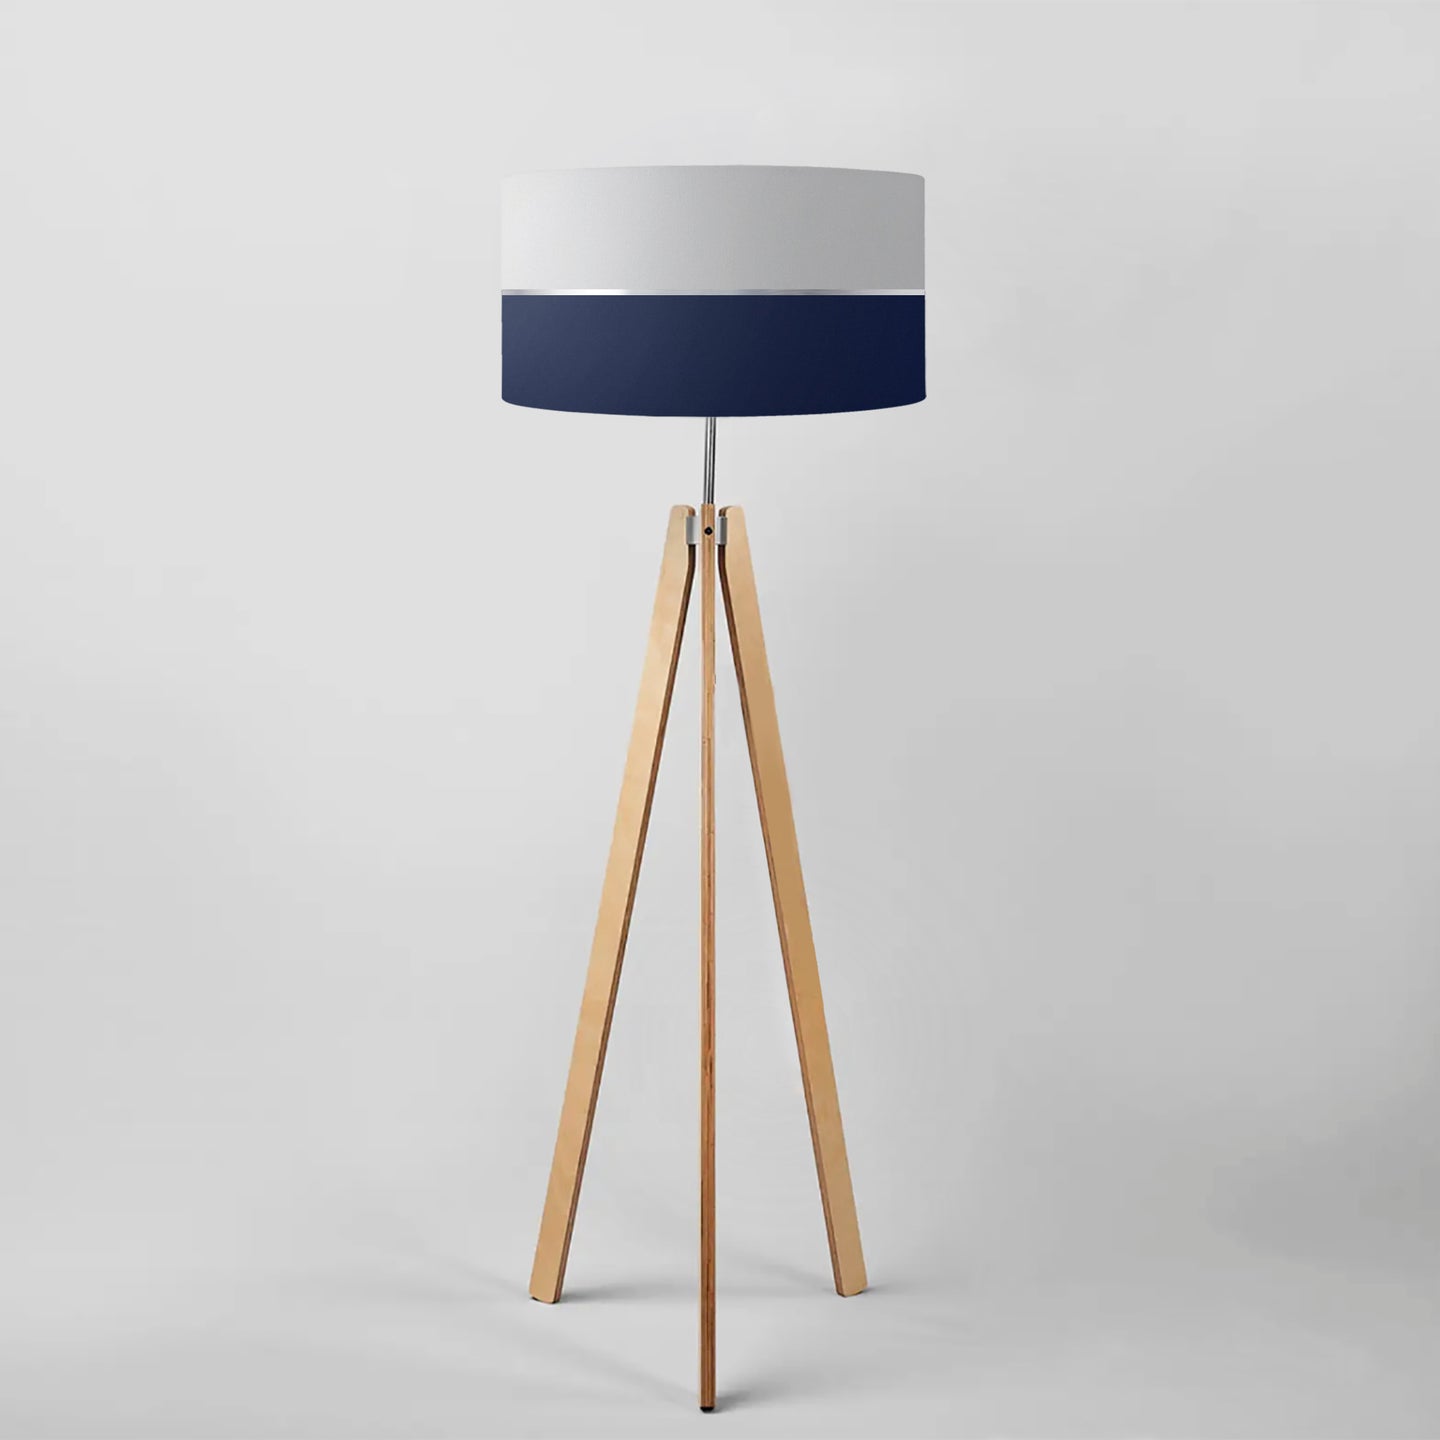 Light Grey, Navy and Silver Stripes drum lampshade, Diameter 40cm (16